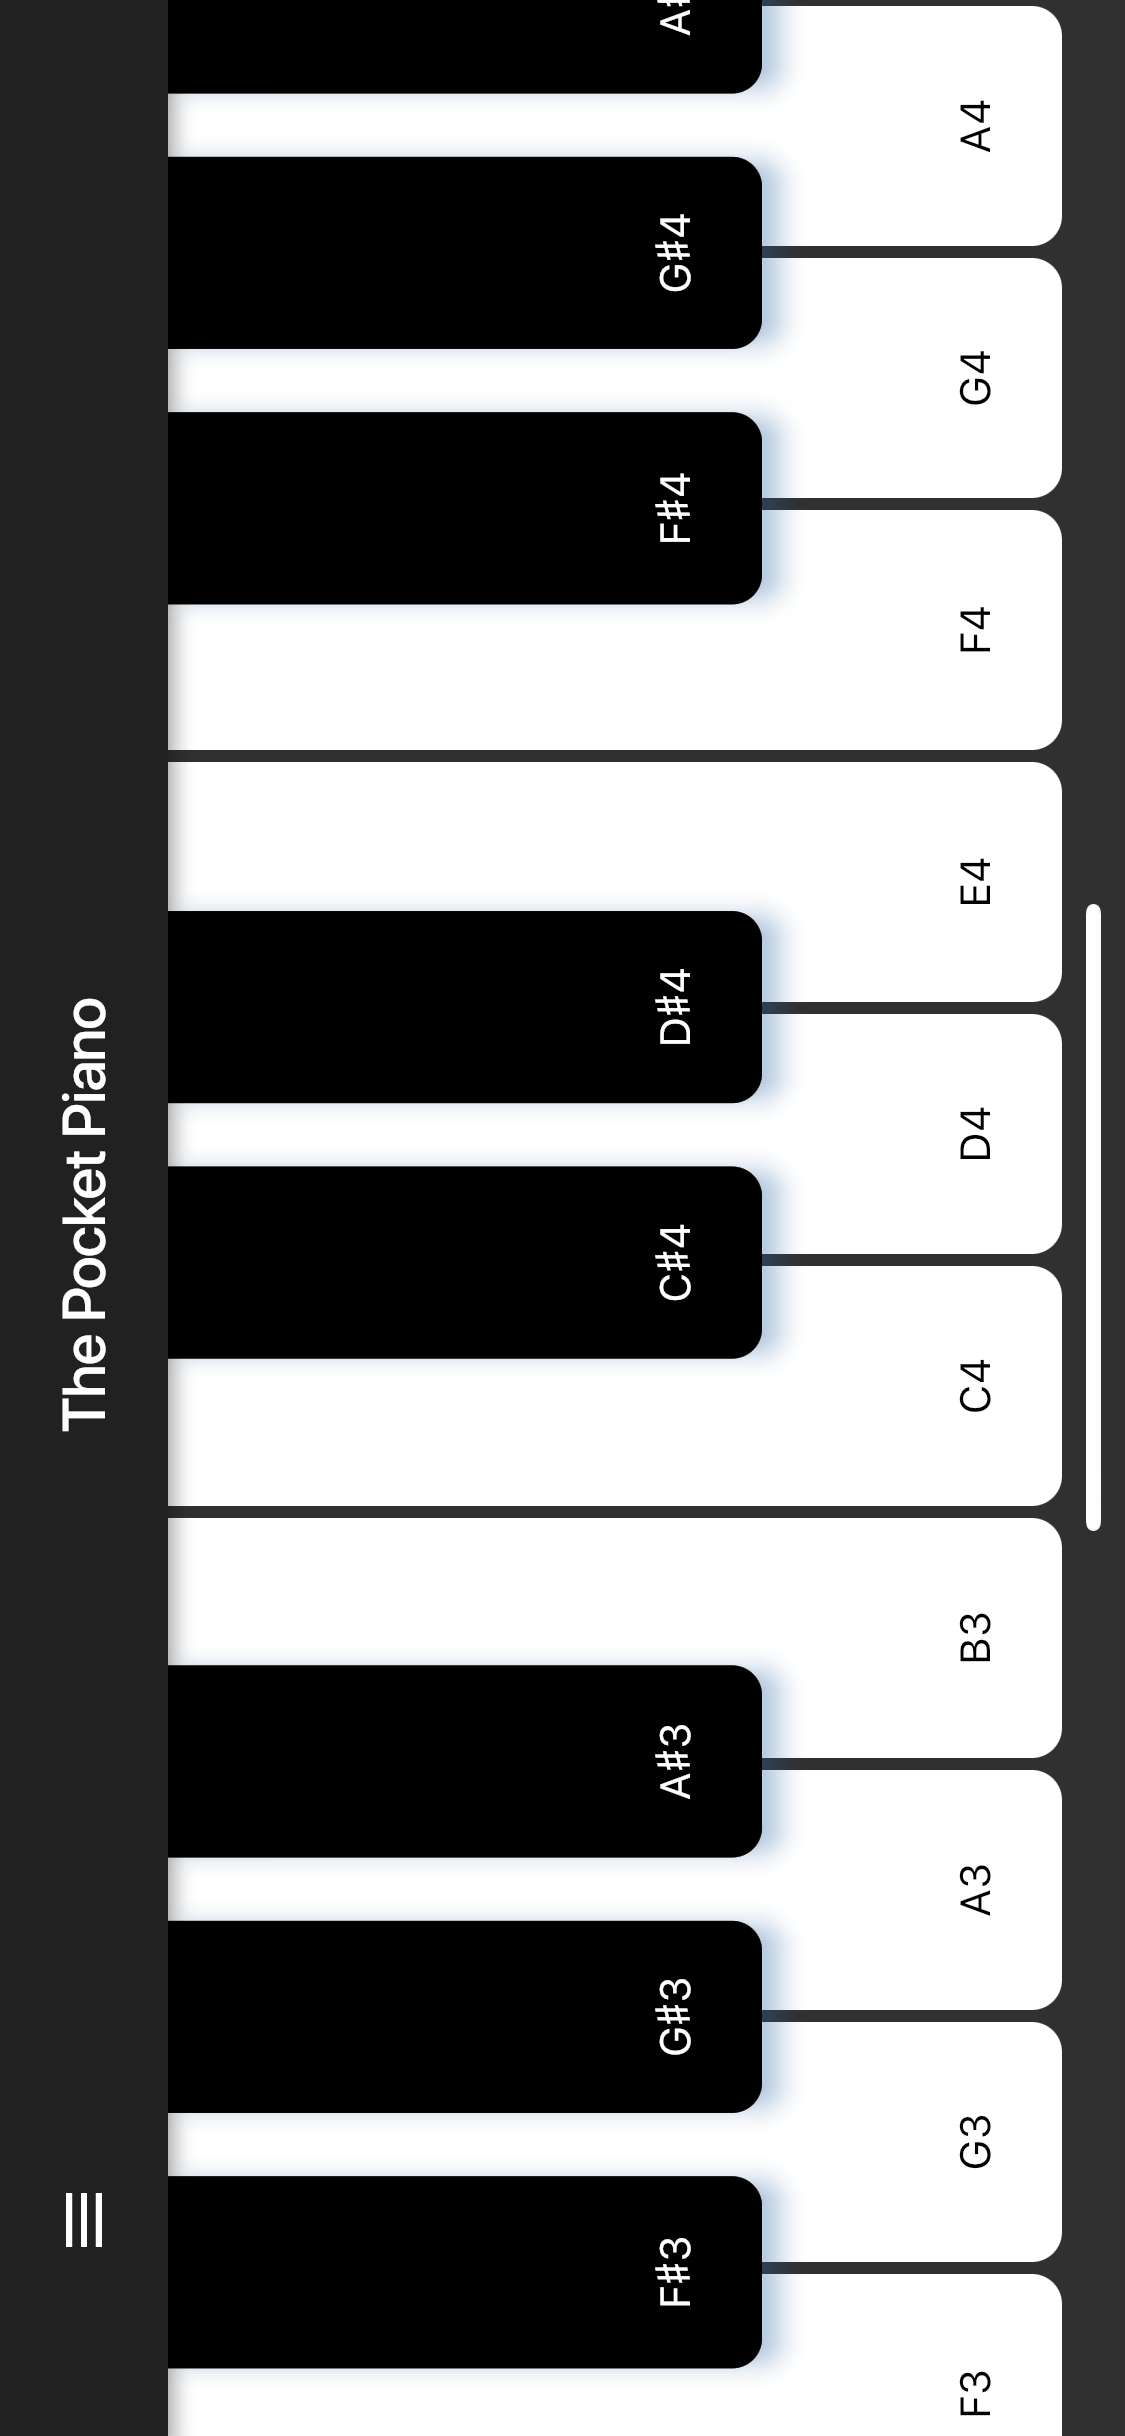 flutter_piano_02.png